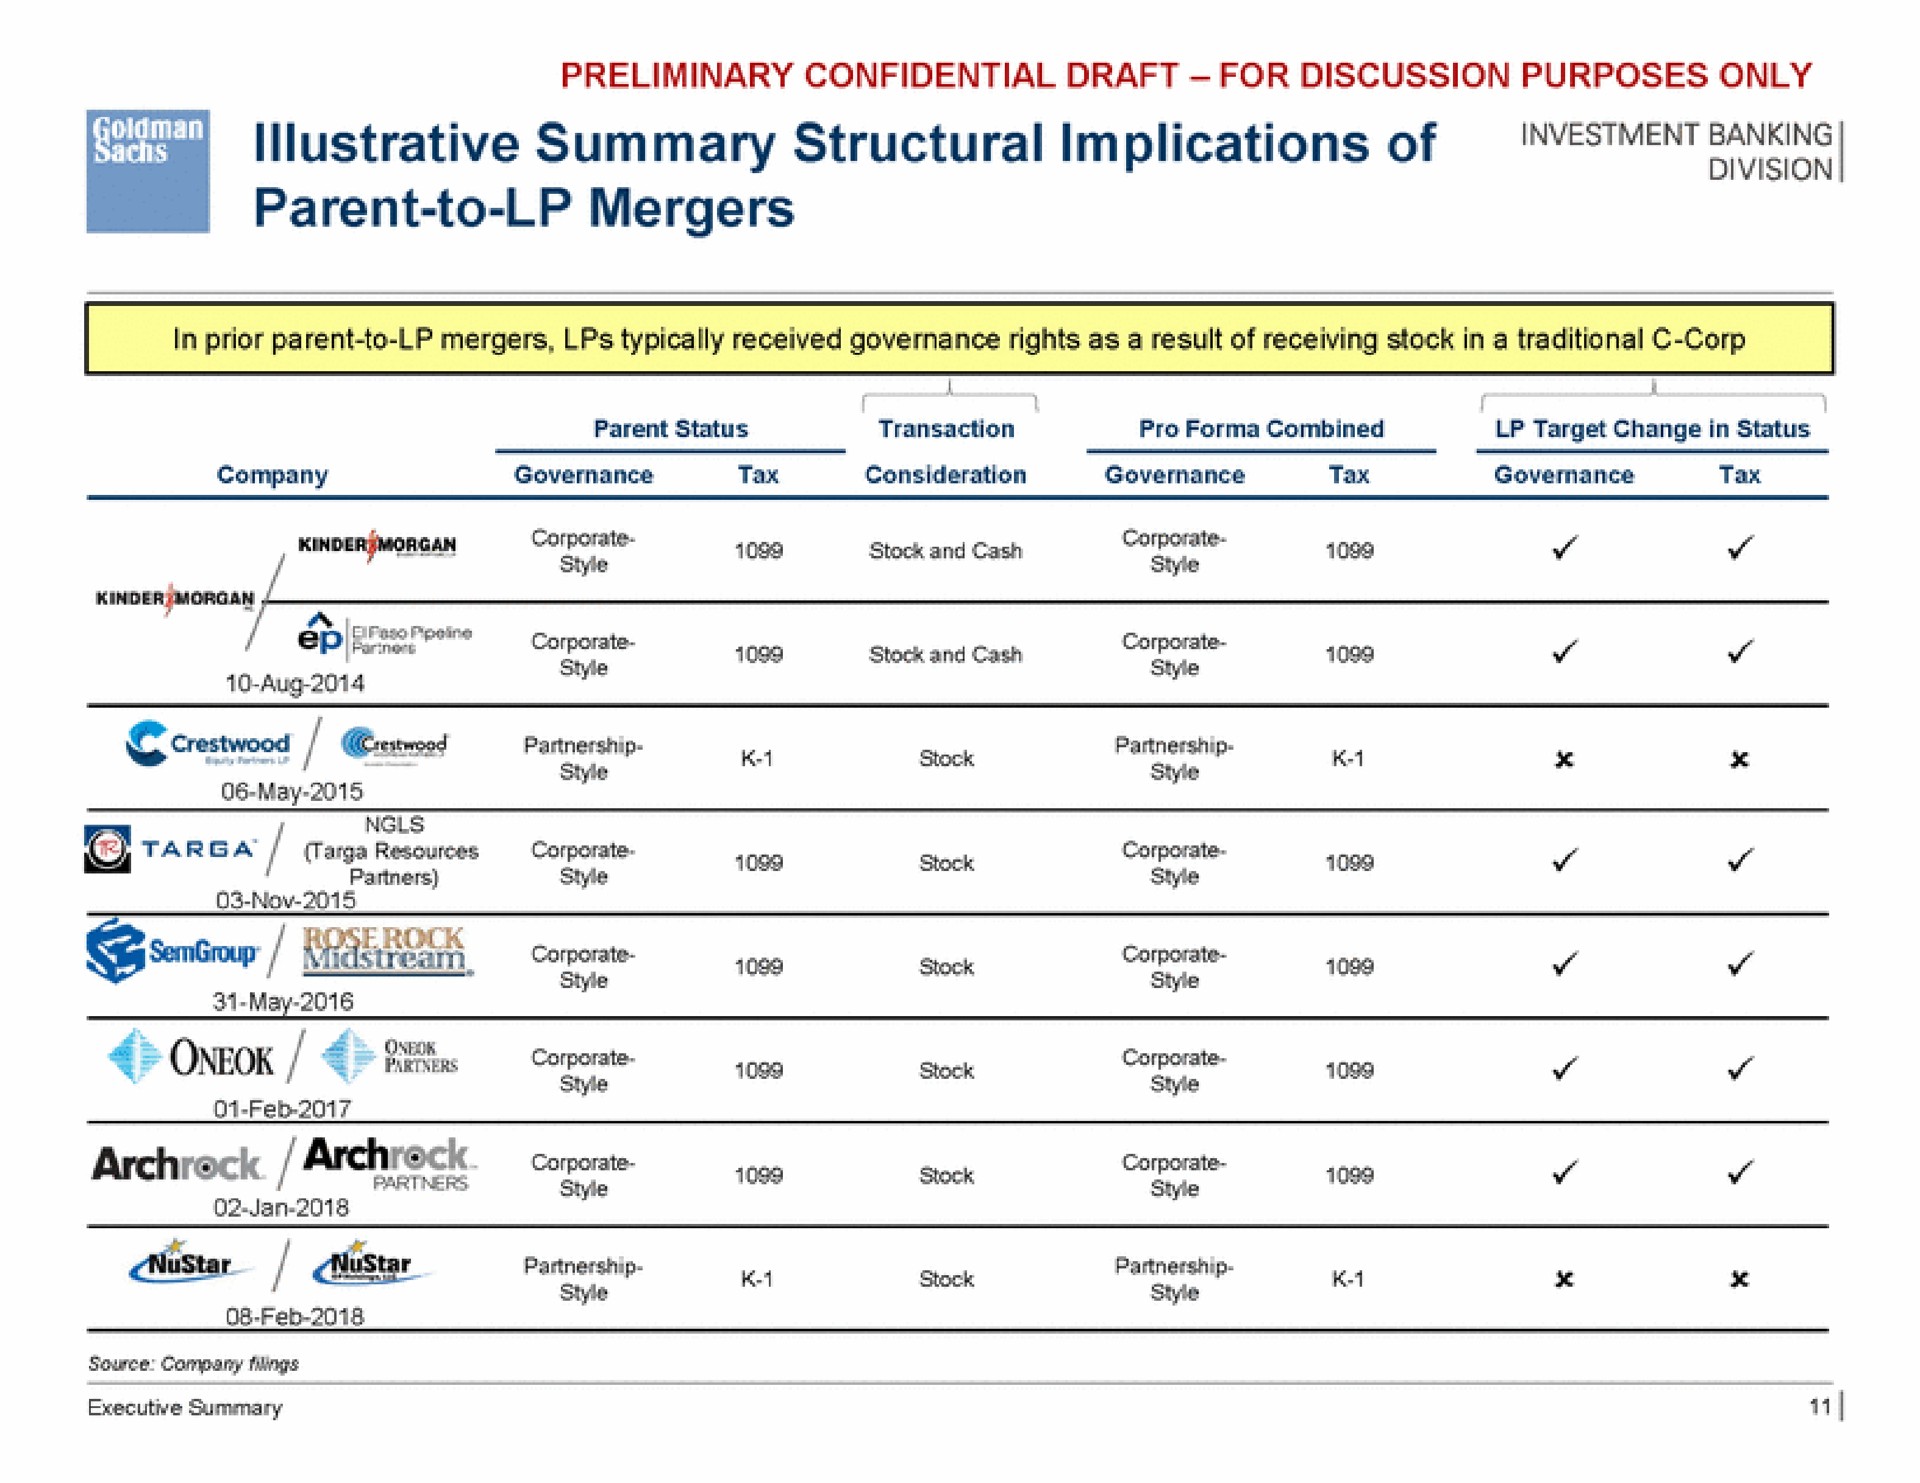 summary structural implications of parent to mergers piss corporate sock | Goldman Sachs